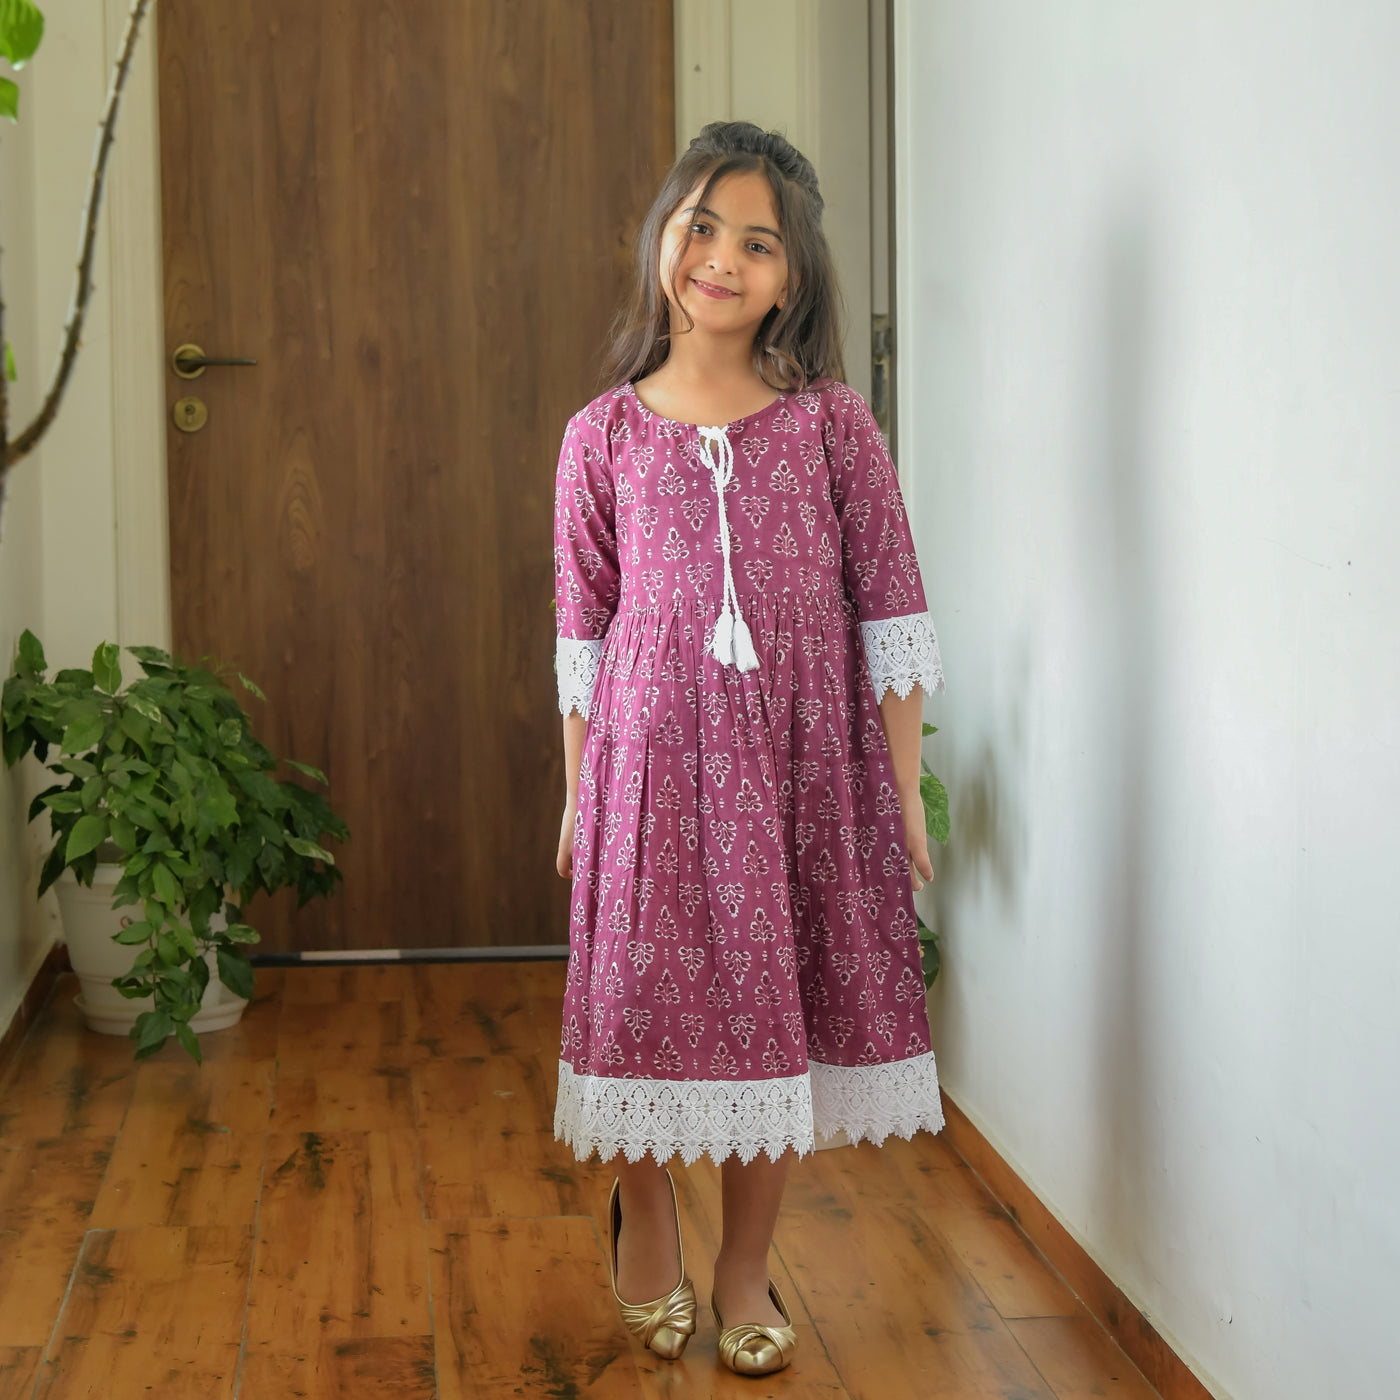 Leafy Purple Cotton Mom and Daughter Dresses